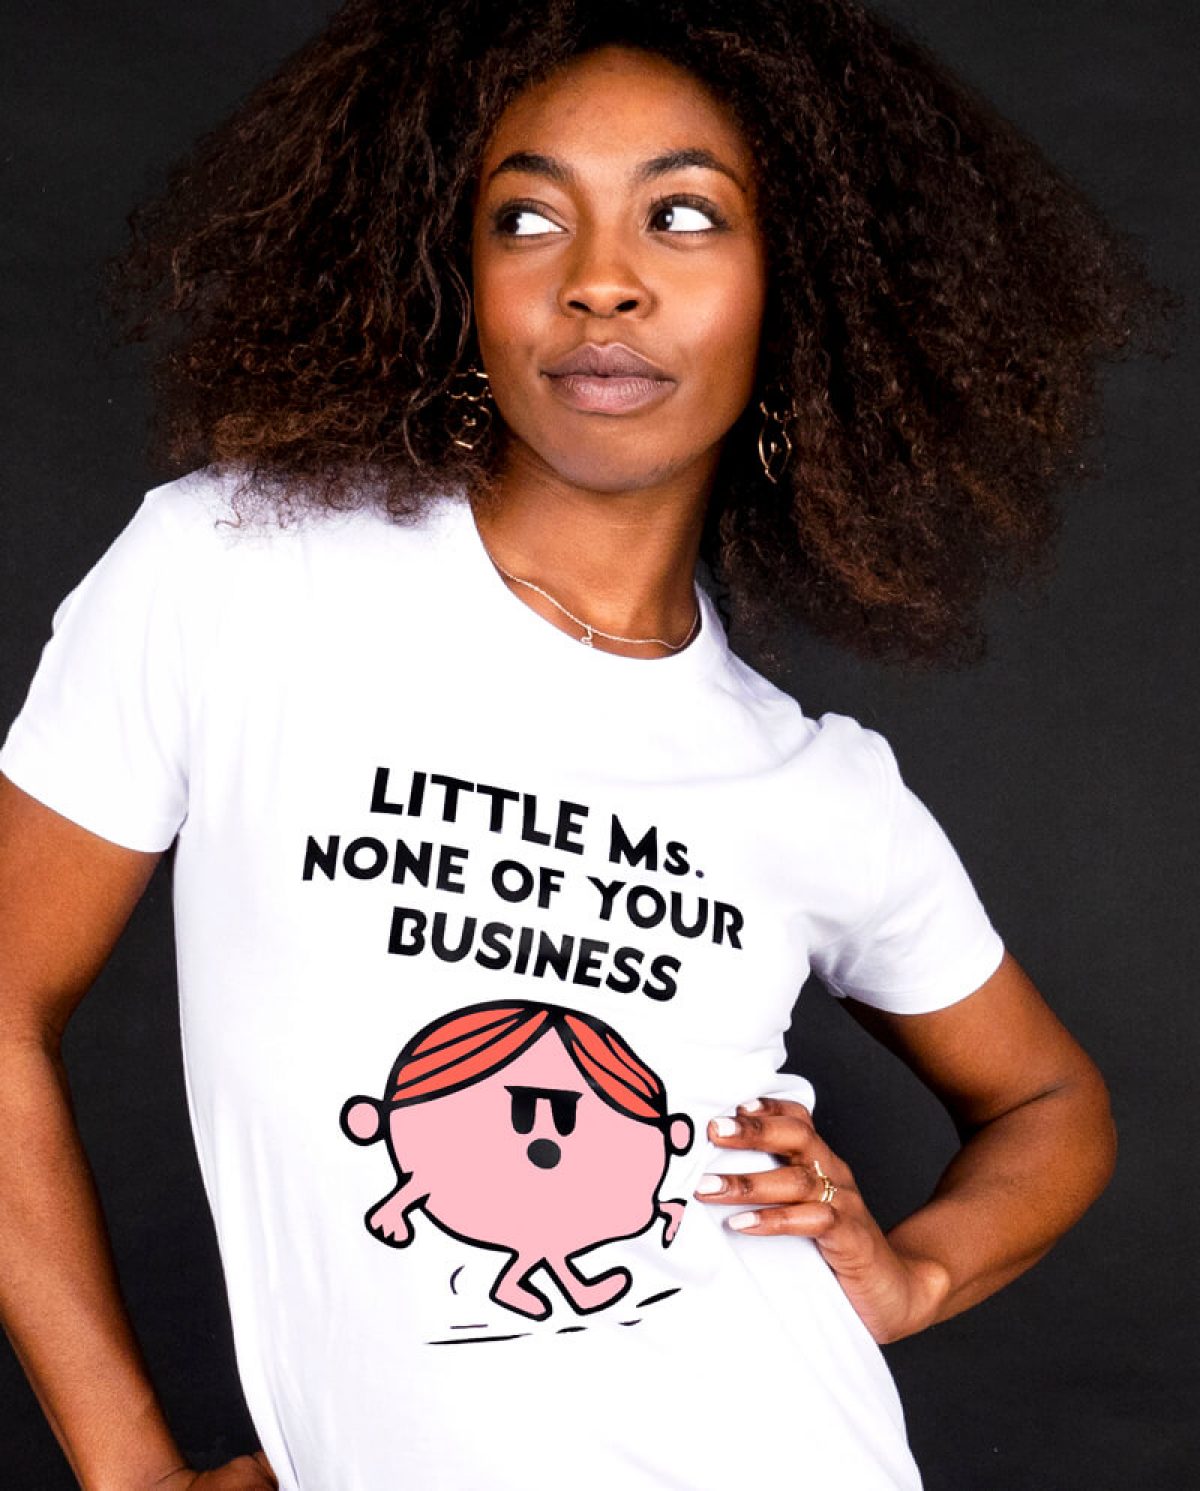 Little Ms. None your business t-shirt -